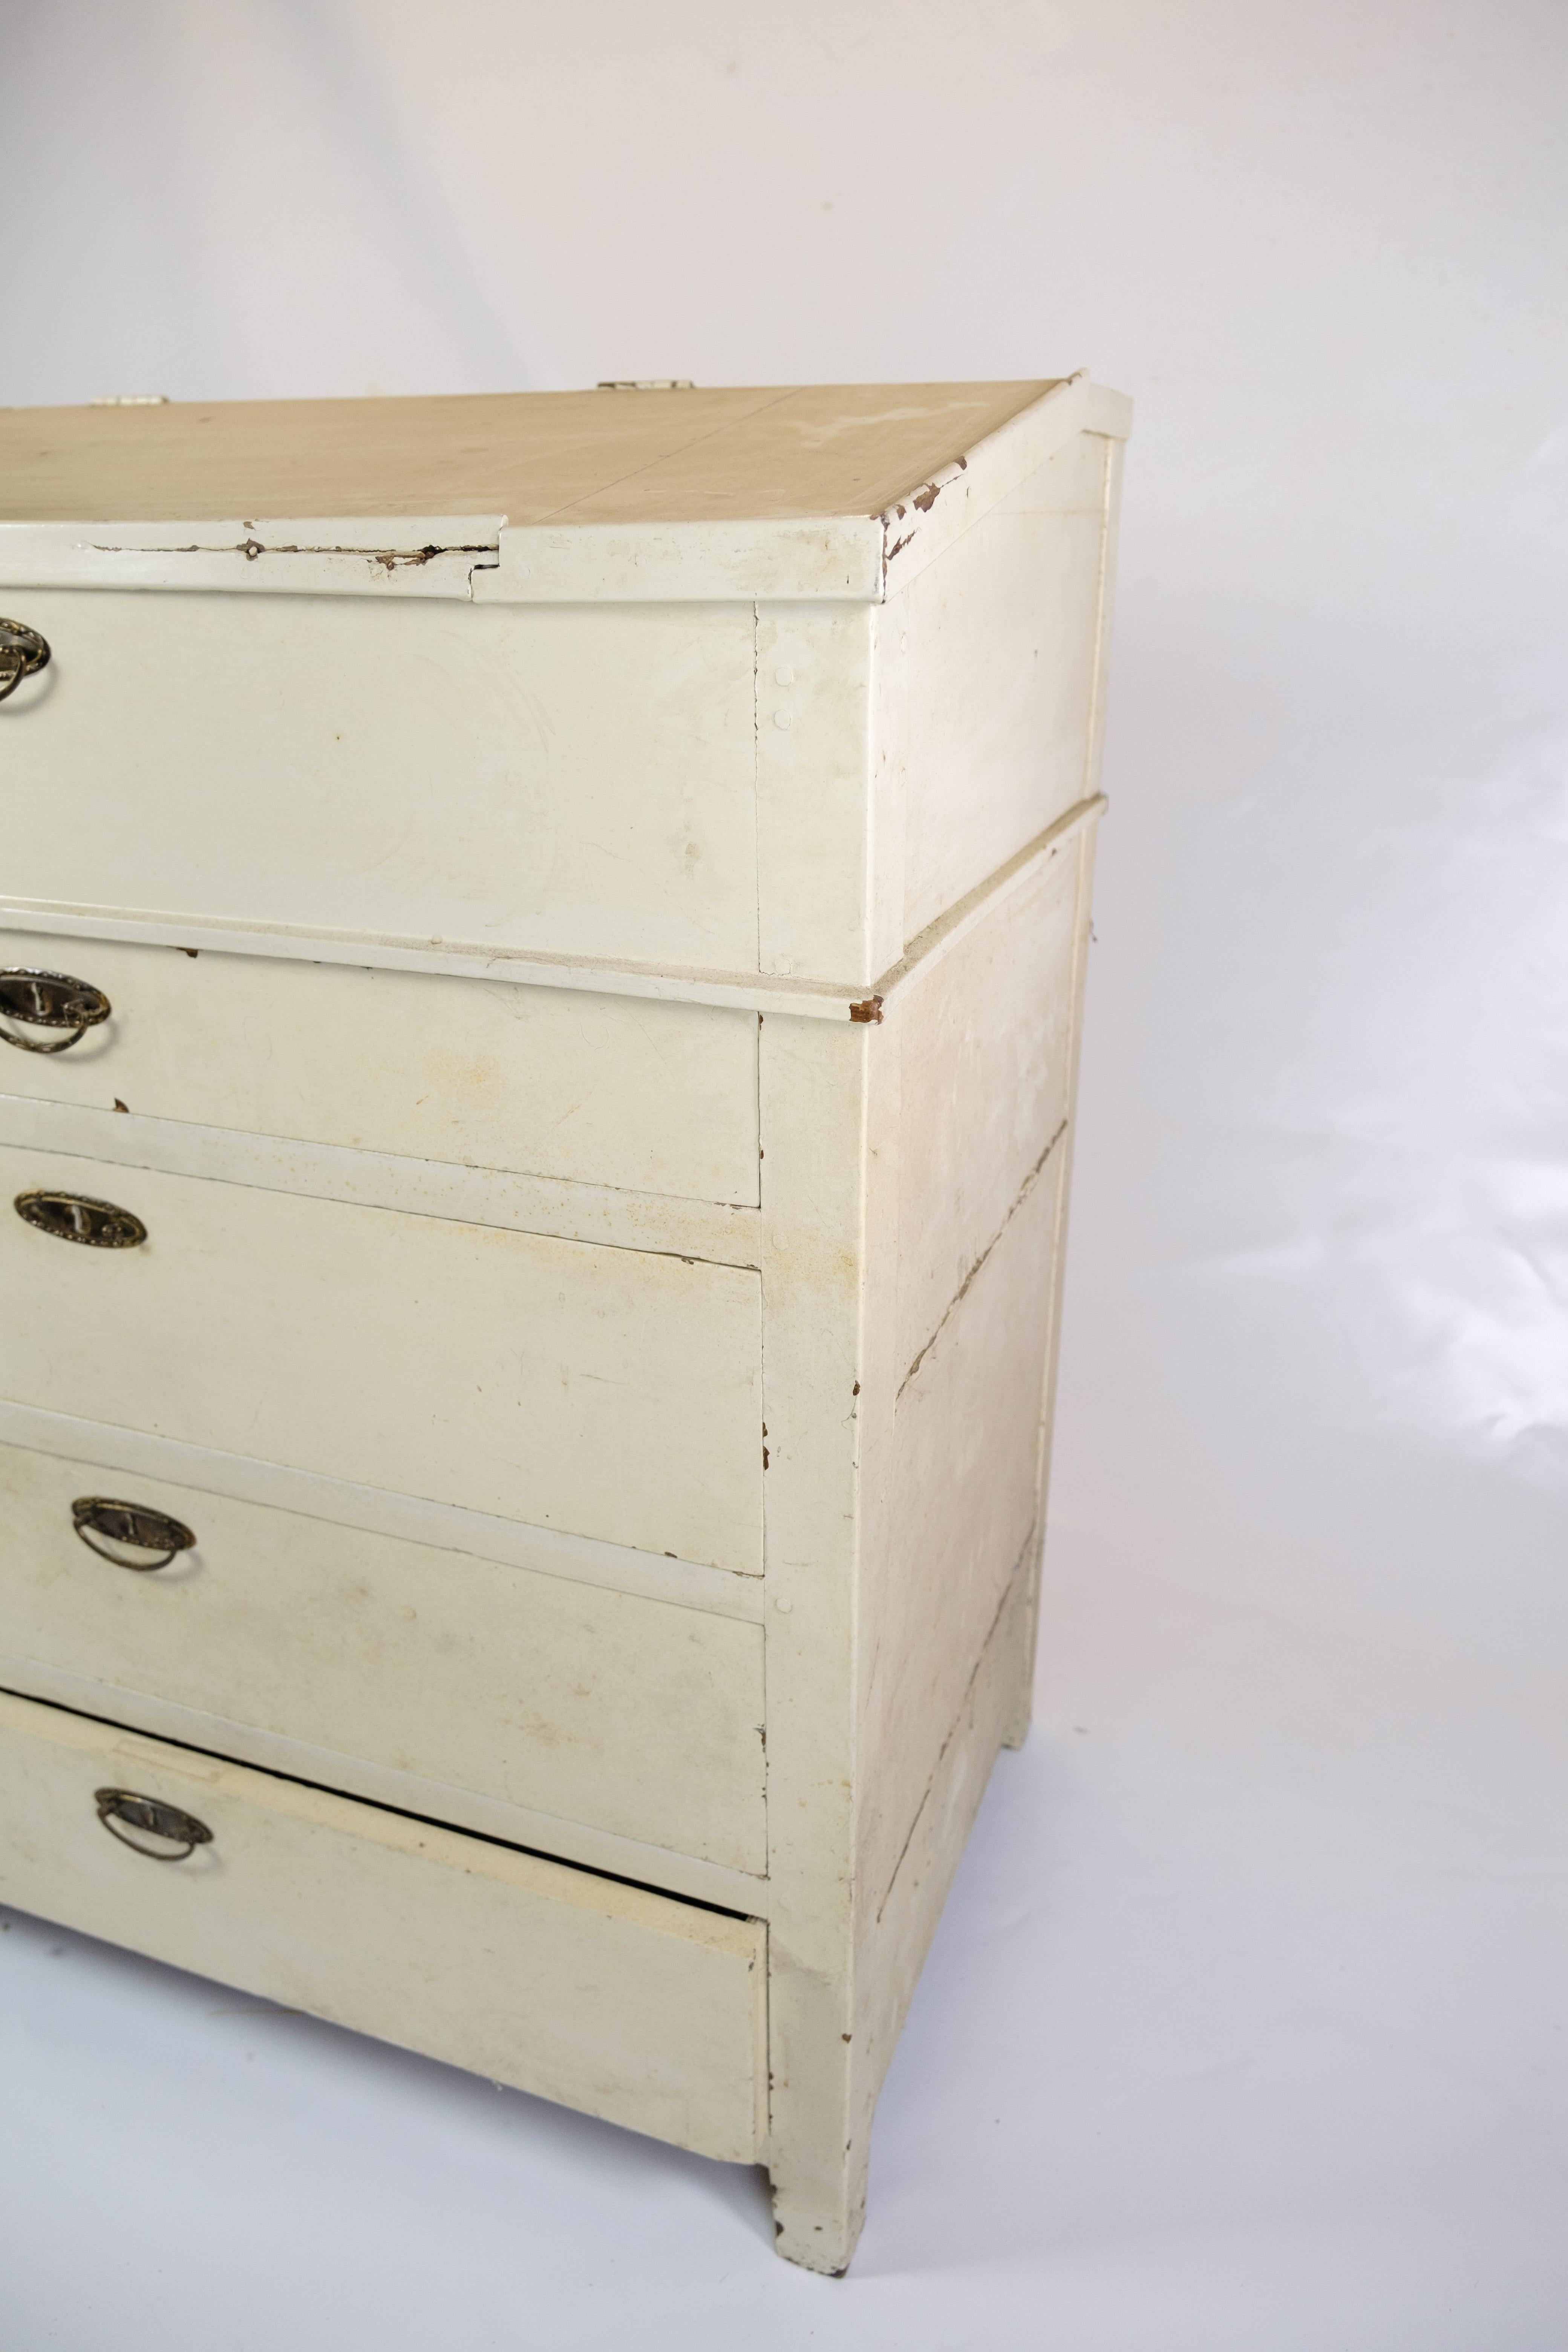 Other Antique Chest Of Drawers/Desk Painted White From 1890s For Sale